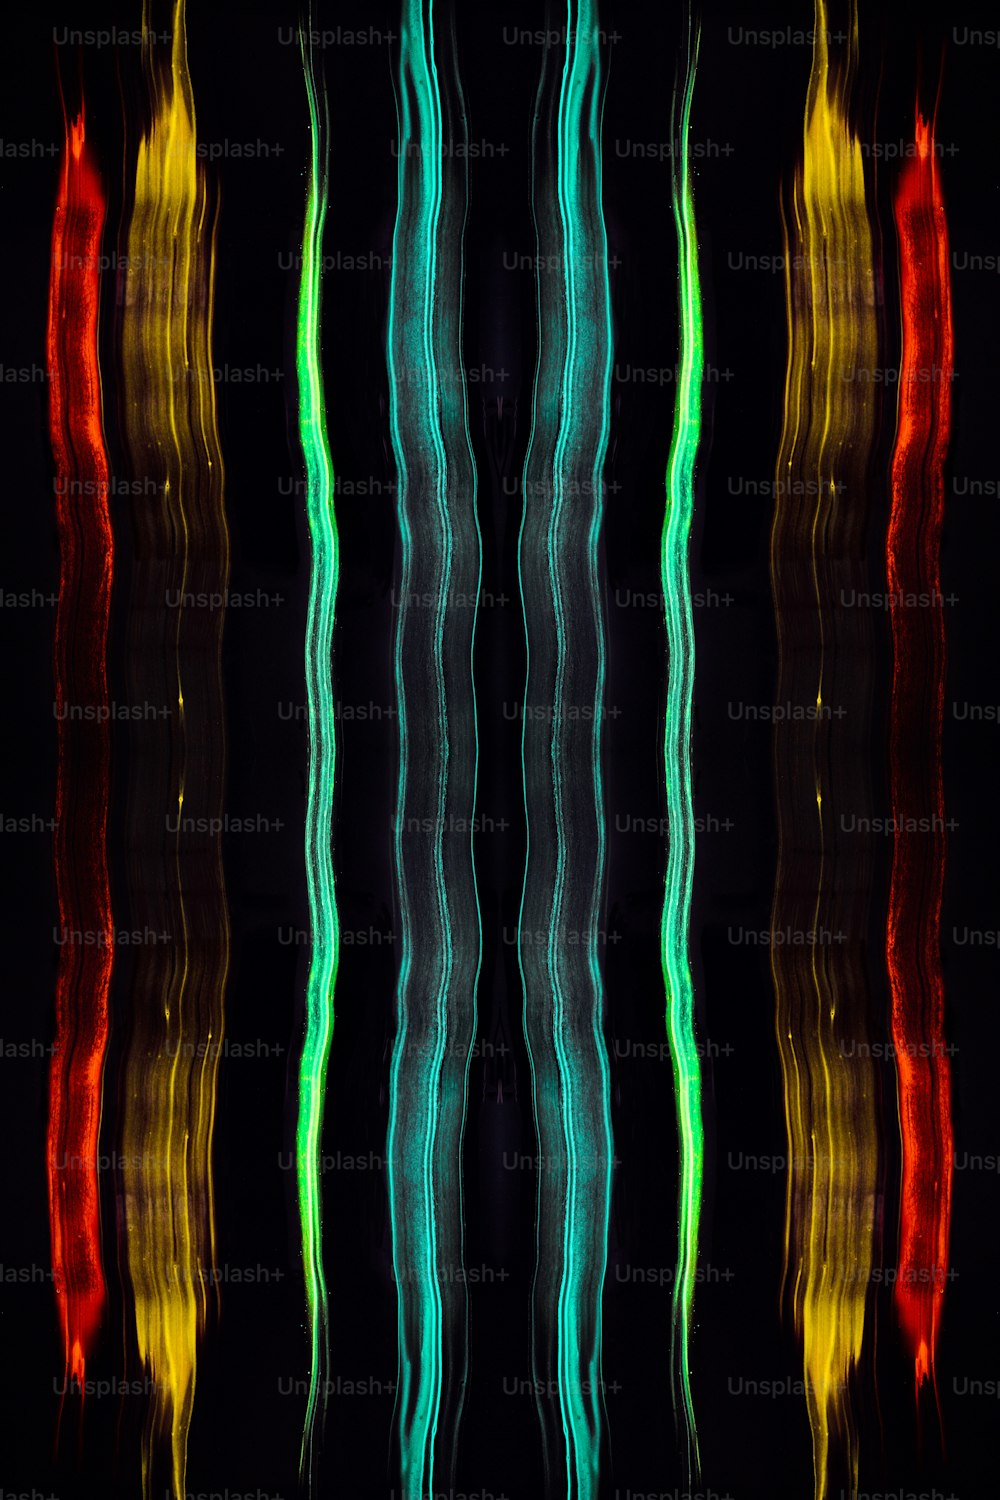 a black background with a multicolored image of wavy lines